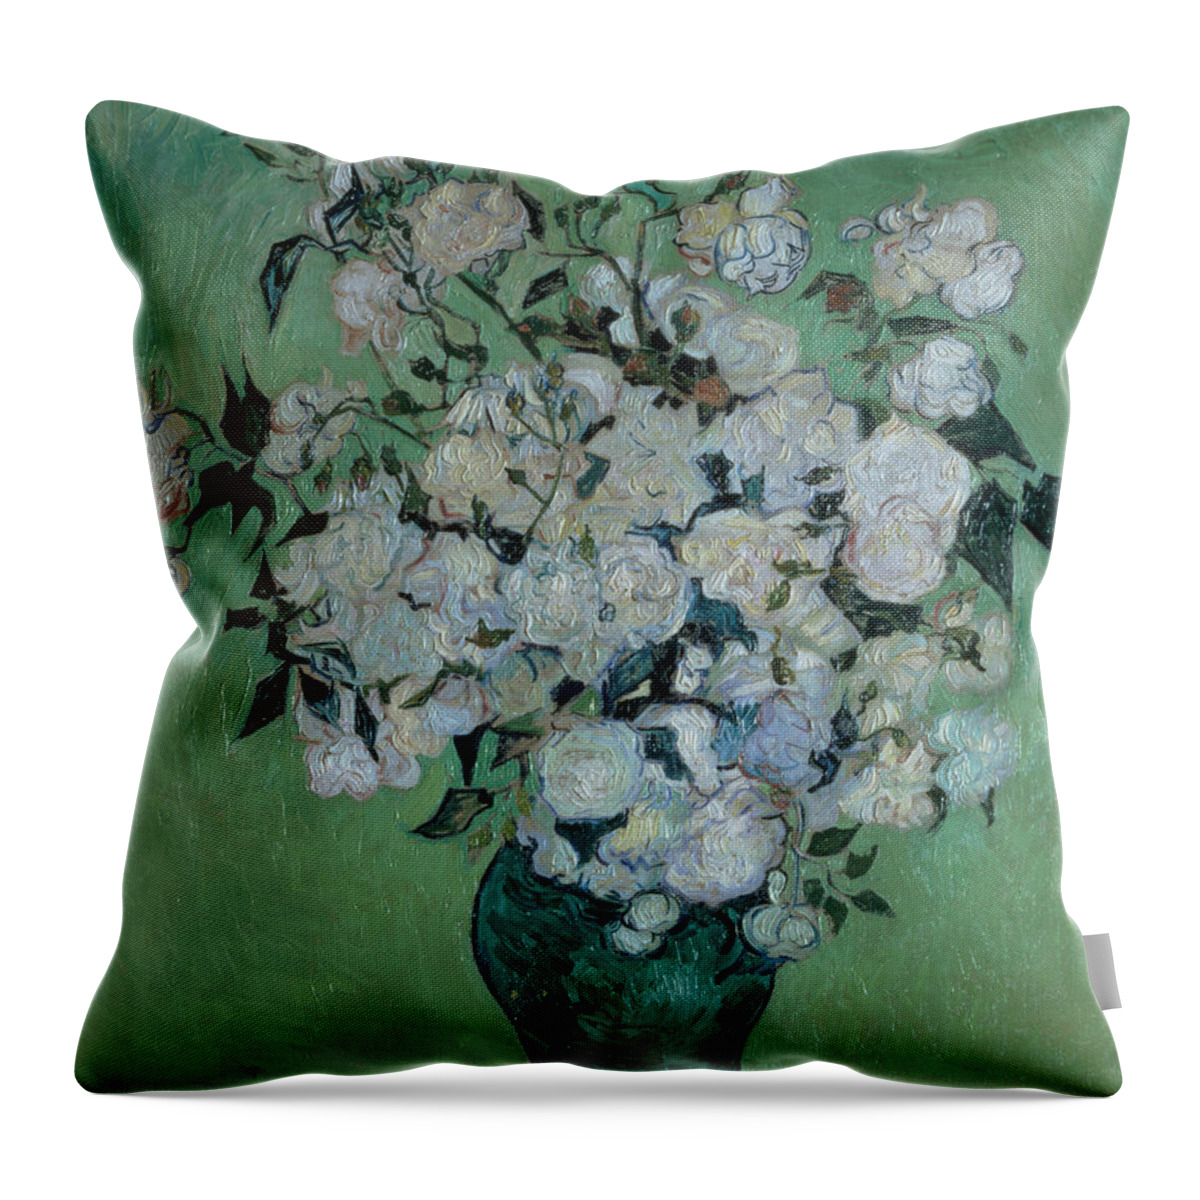 Vase Throw Pillow featuring the painting A Vase of Roses by Vincent van Gogh